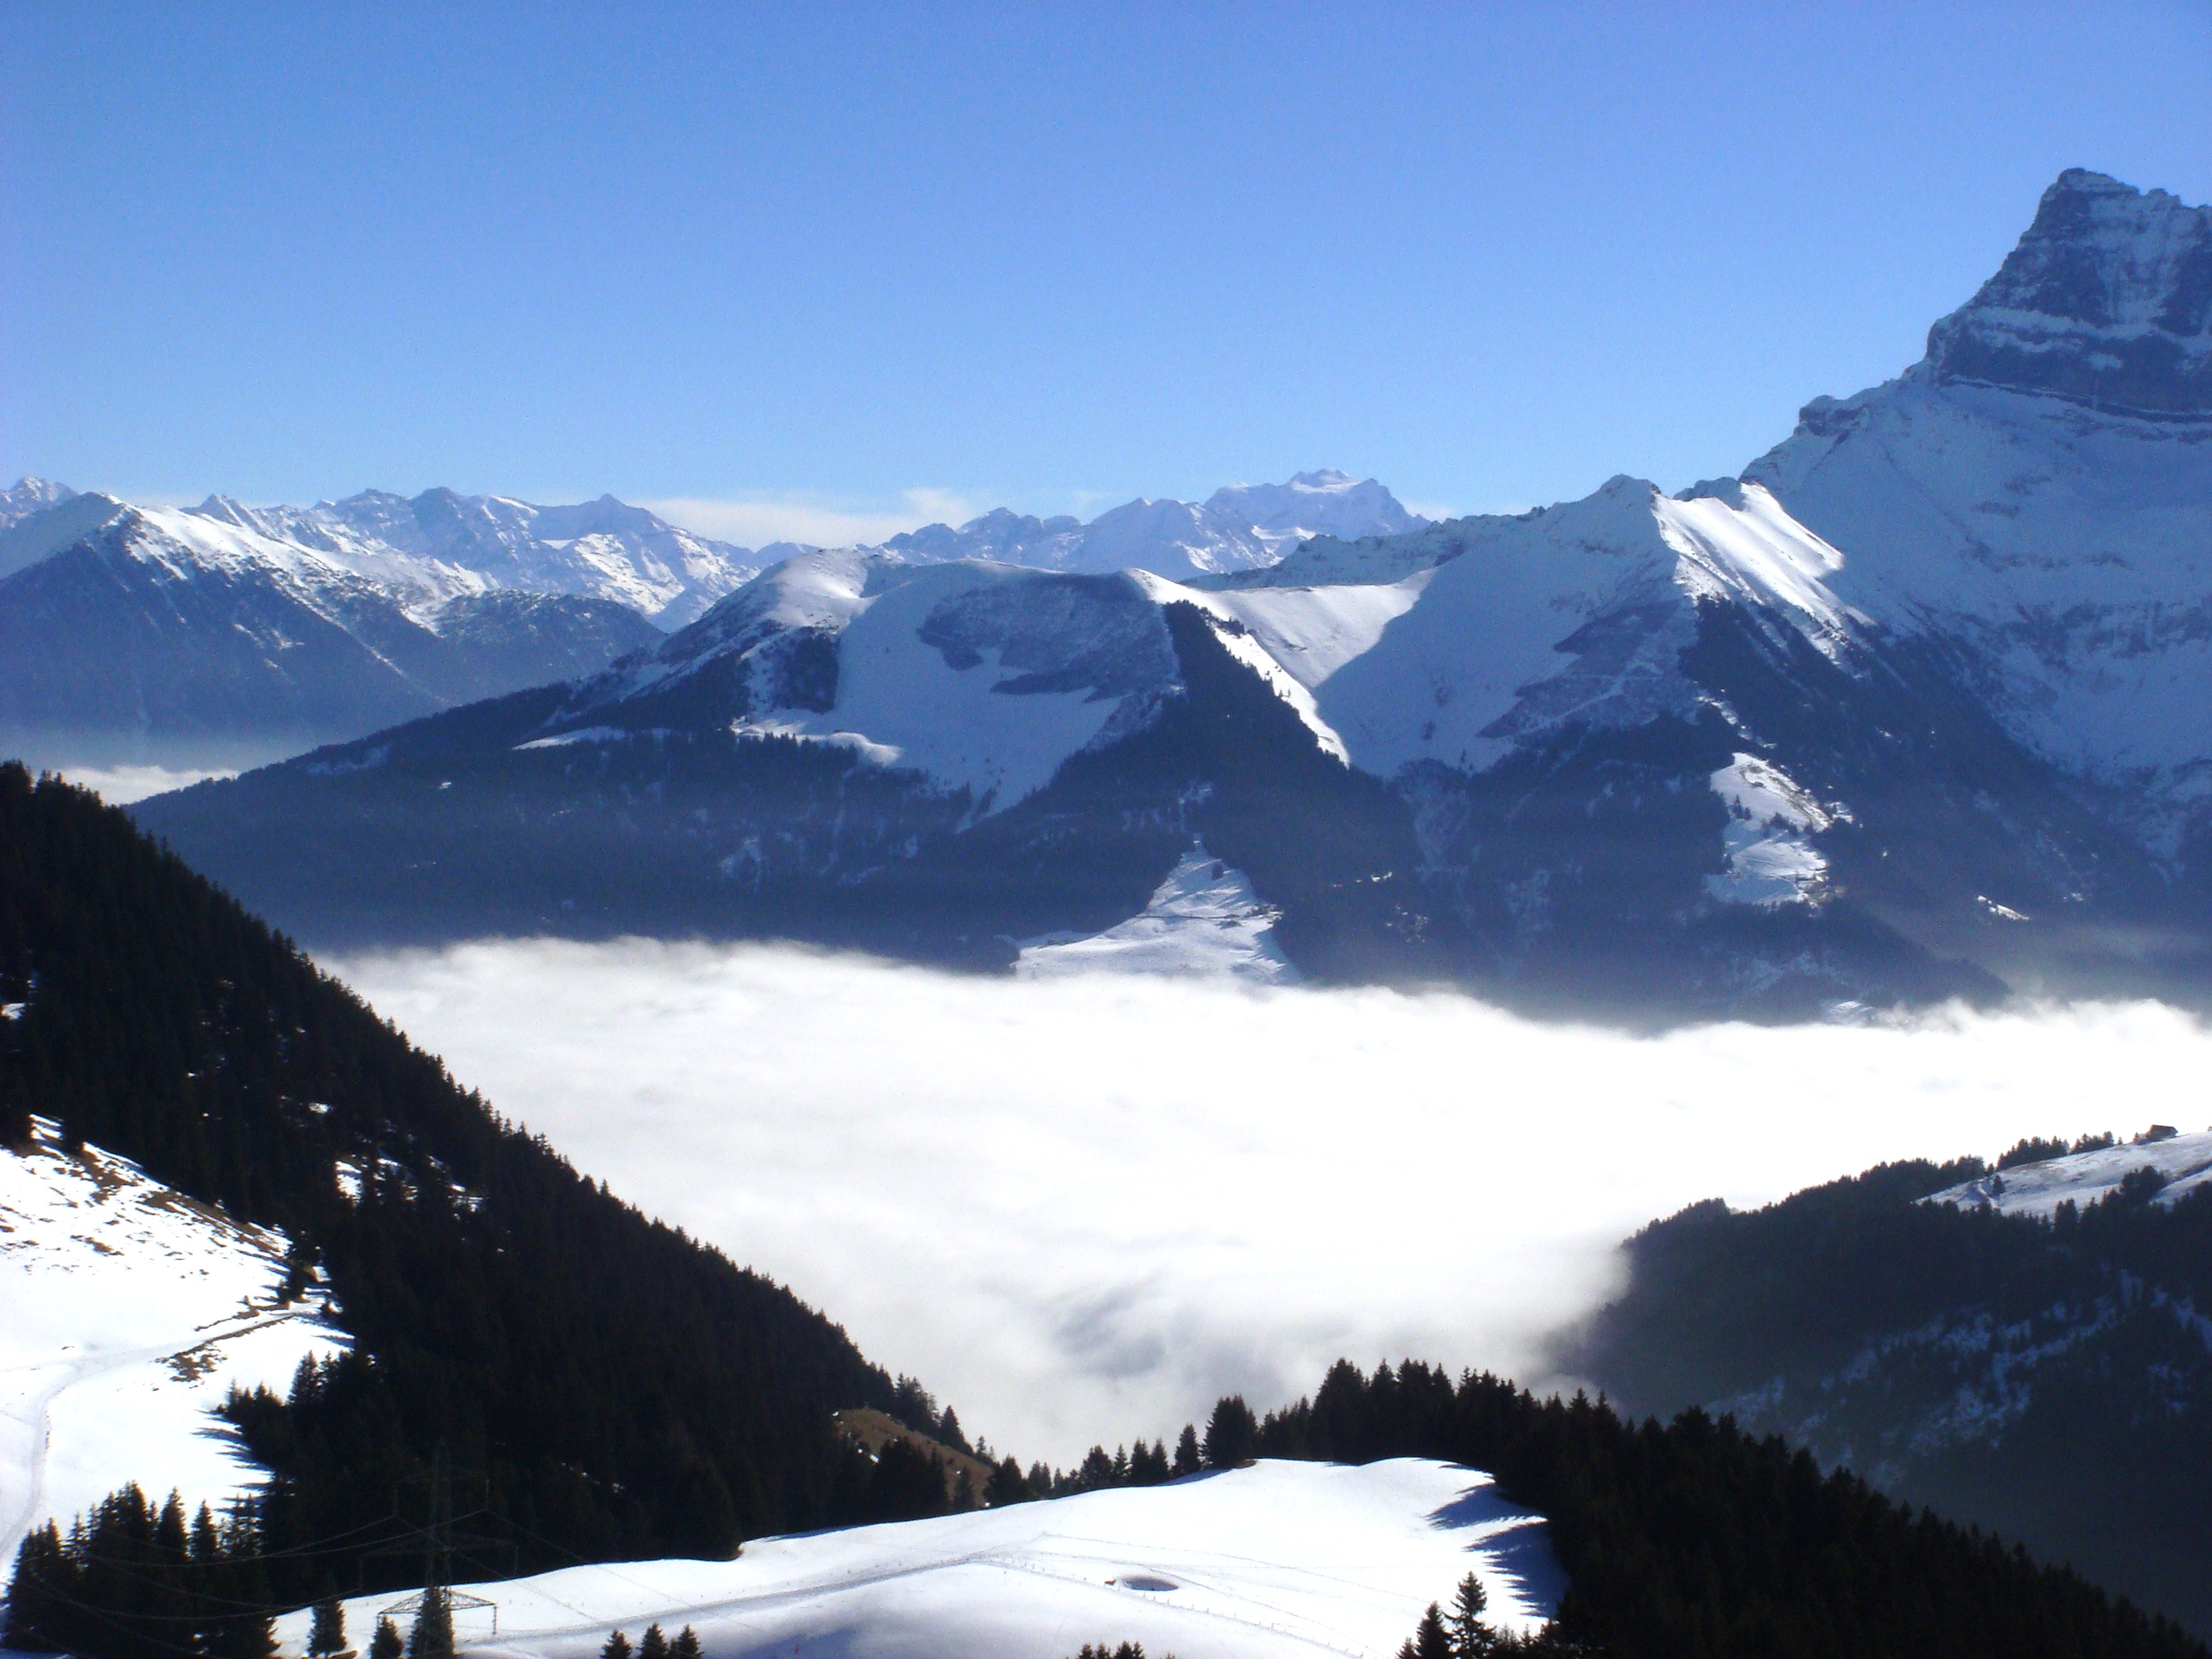 Blue morning mist in paradise, Chatel